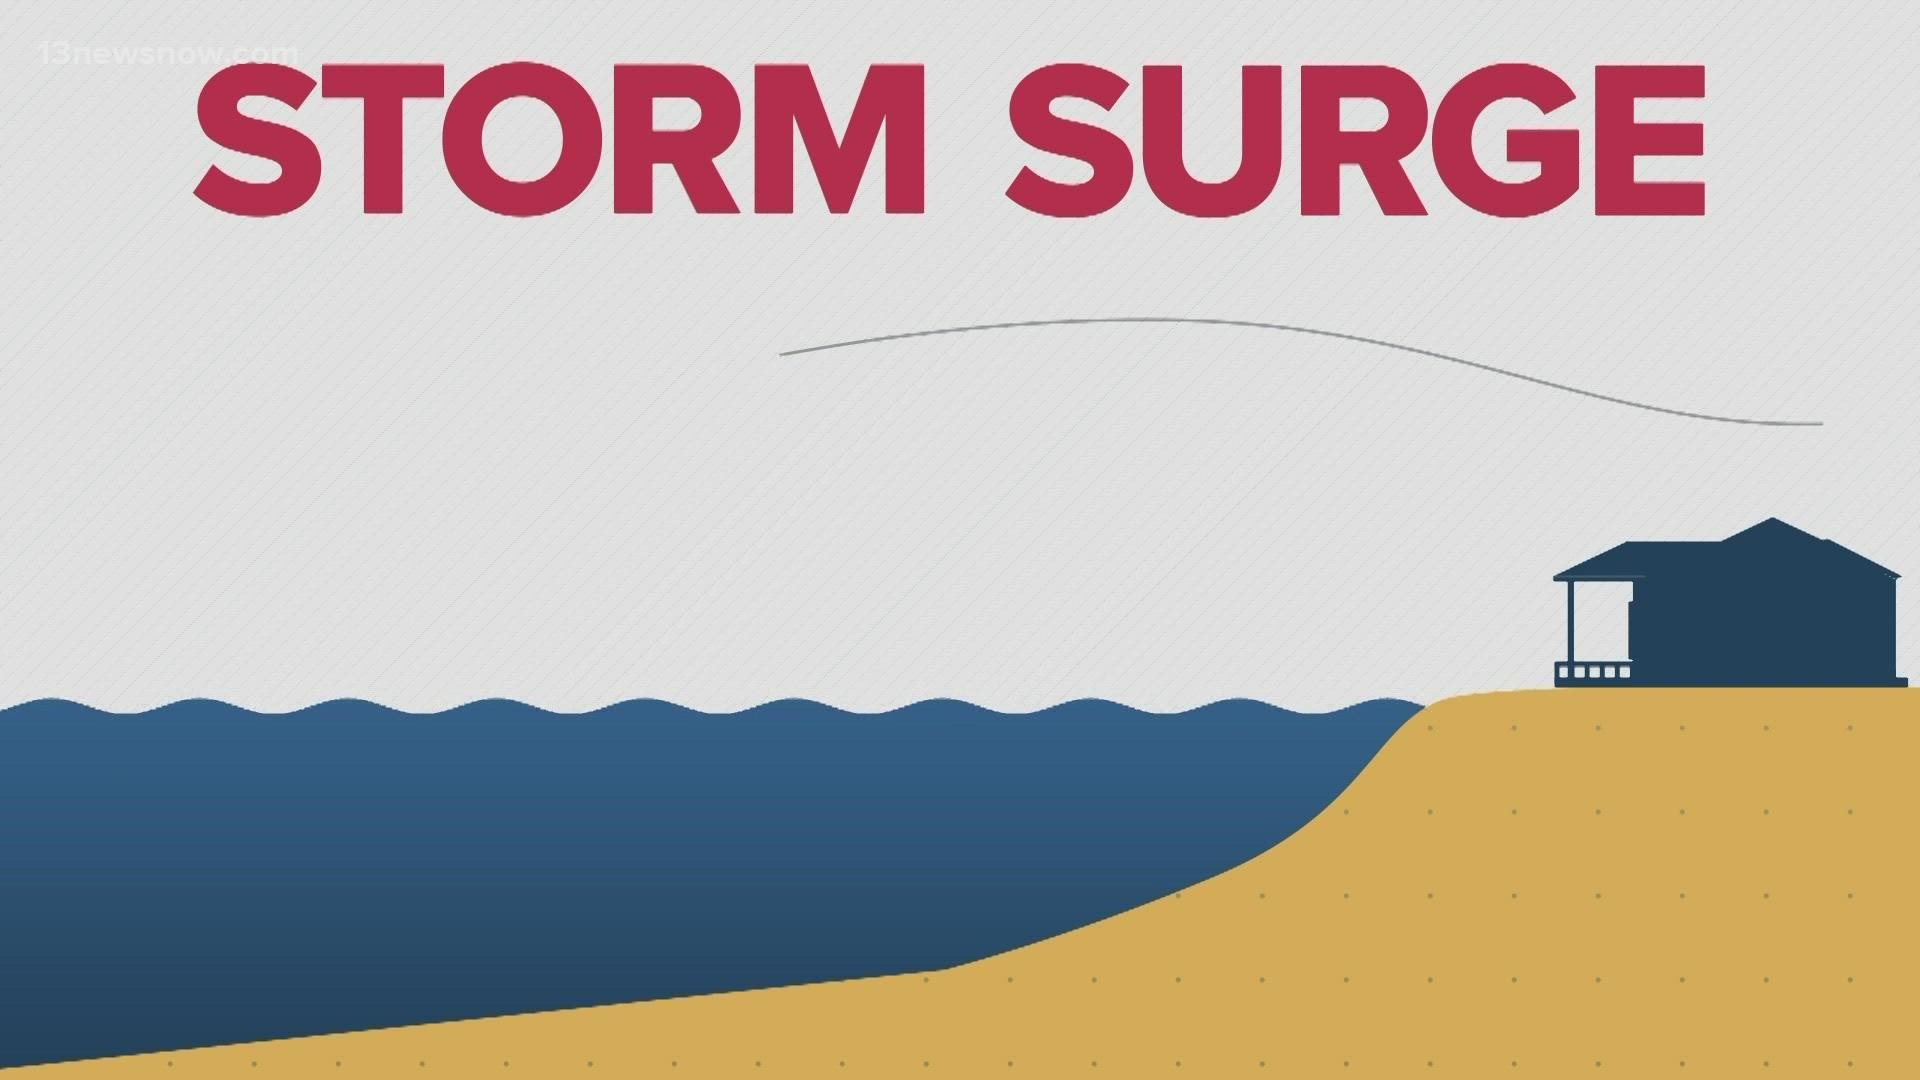 Storm surge is often the most deadly part of a hurricane's impact. Today's Hurricane Fast Facts looks into why.